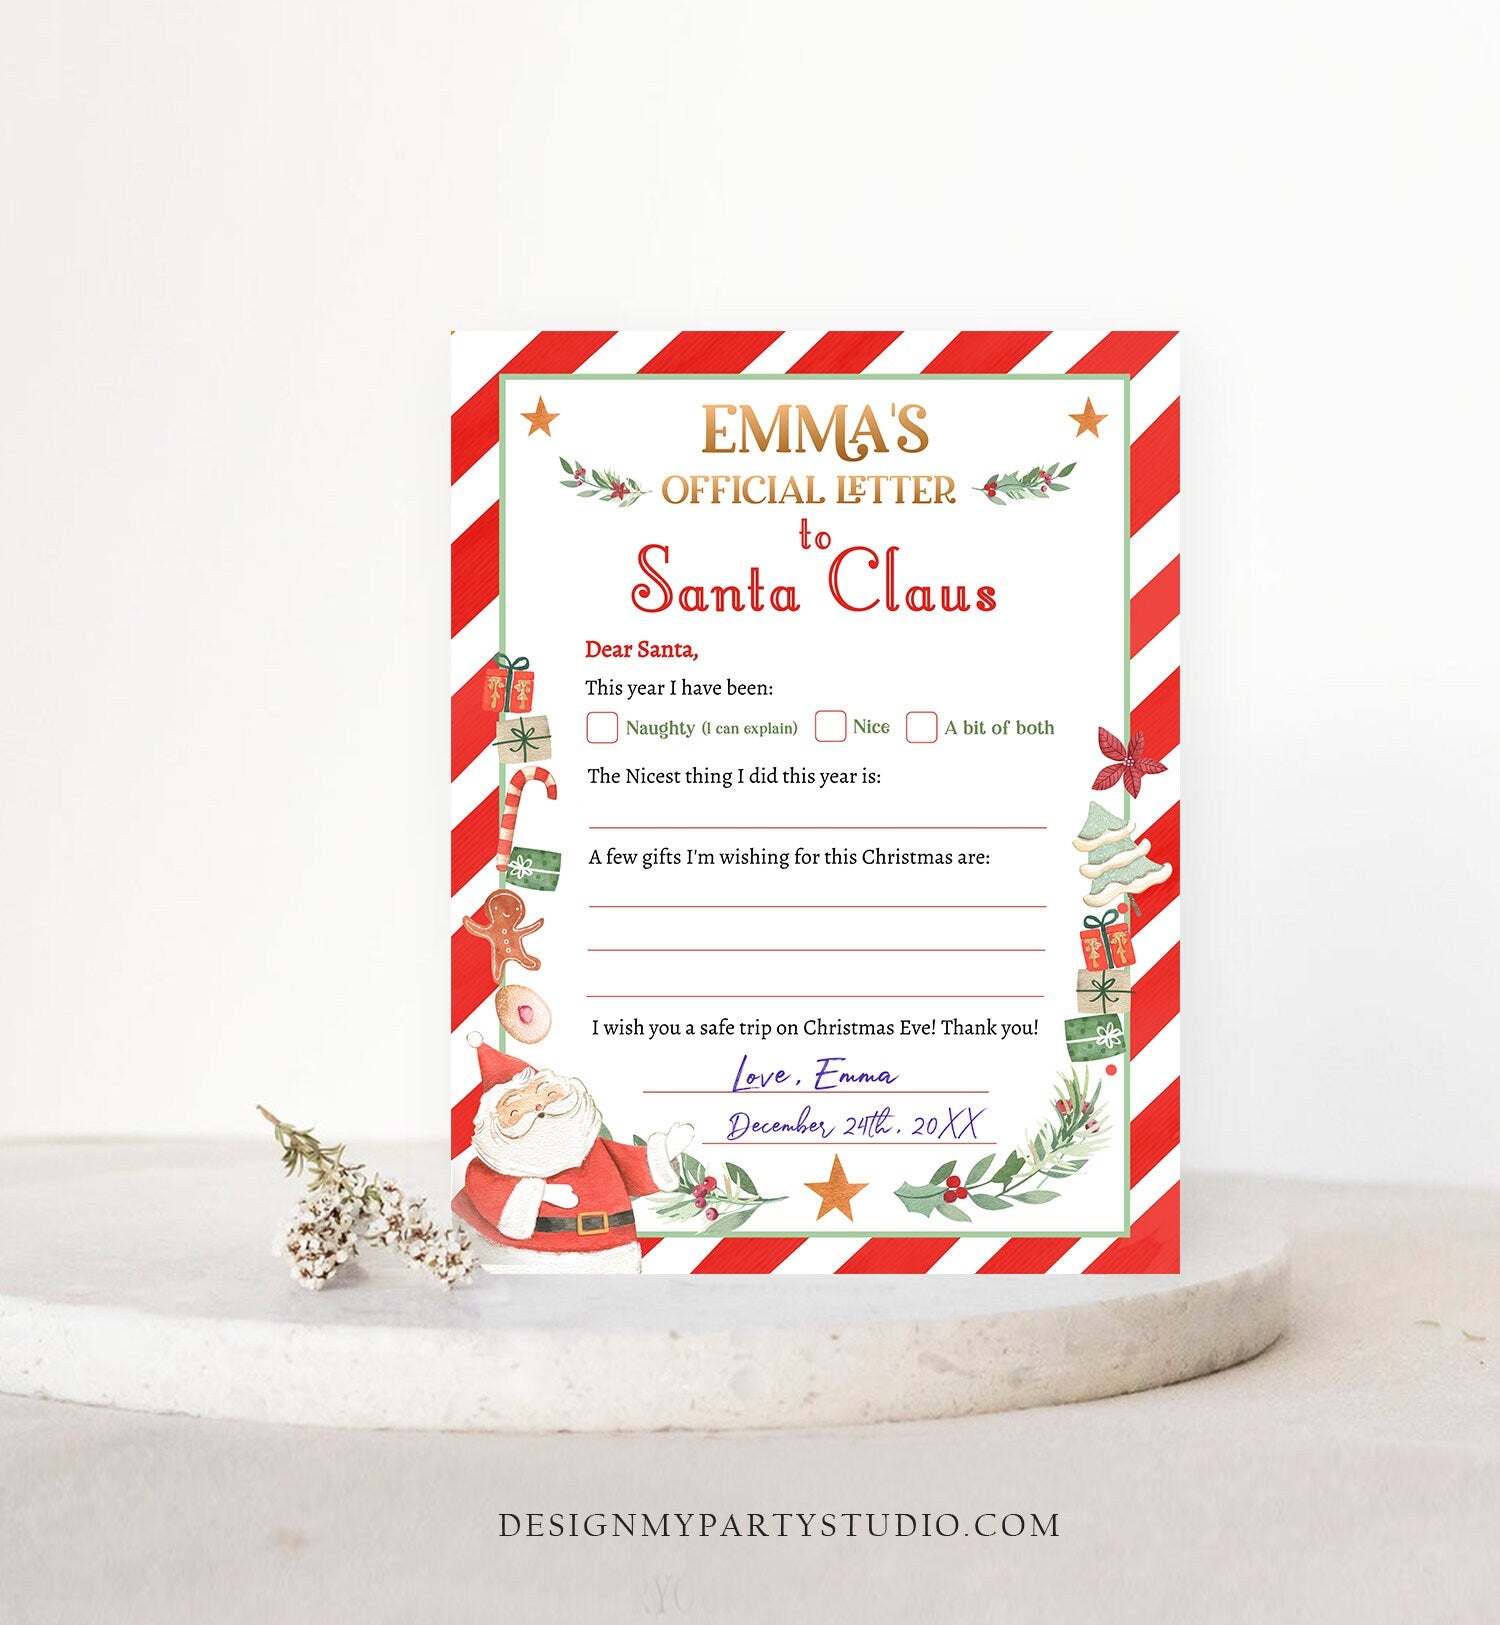 Editable Official Letter to Santa Claus From The Desk of Santa Christmas Eve North Pole Mail Instant Download Printable Template 0358